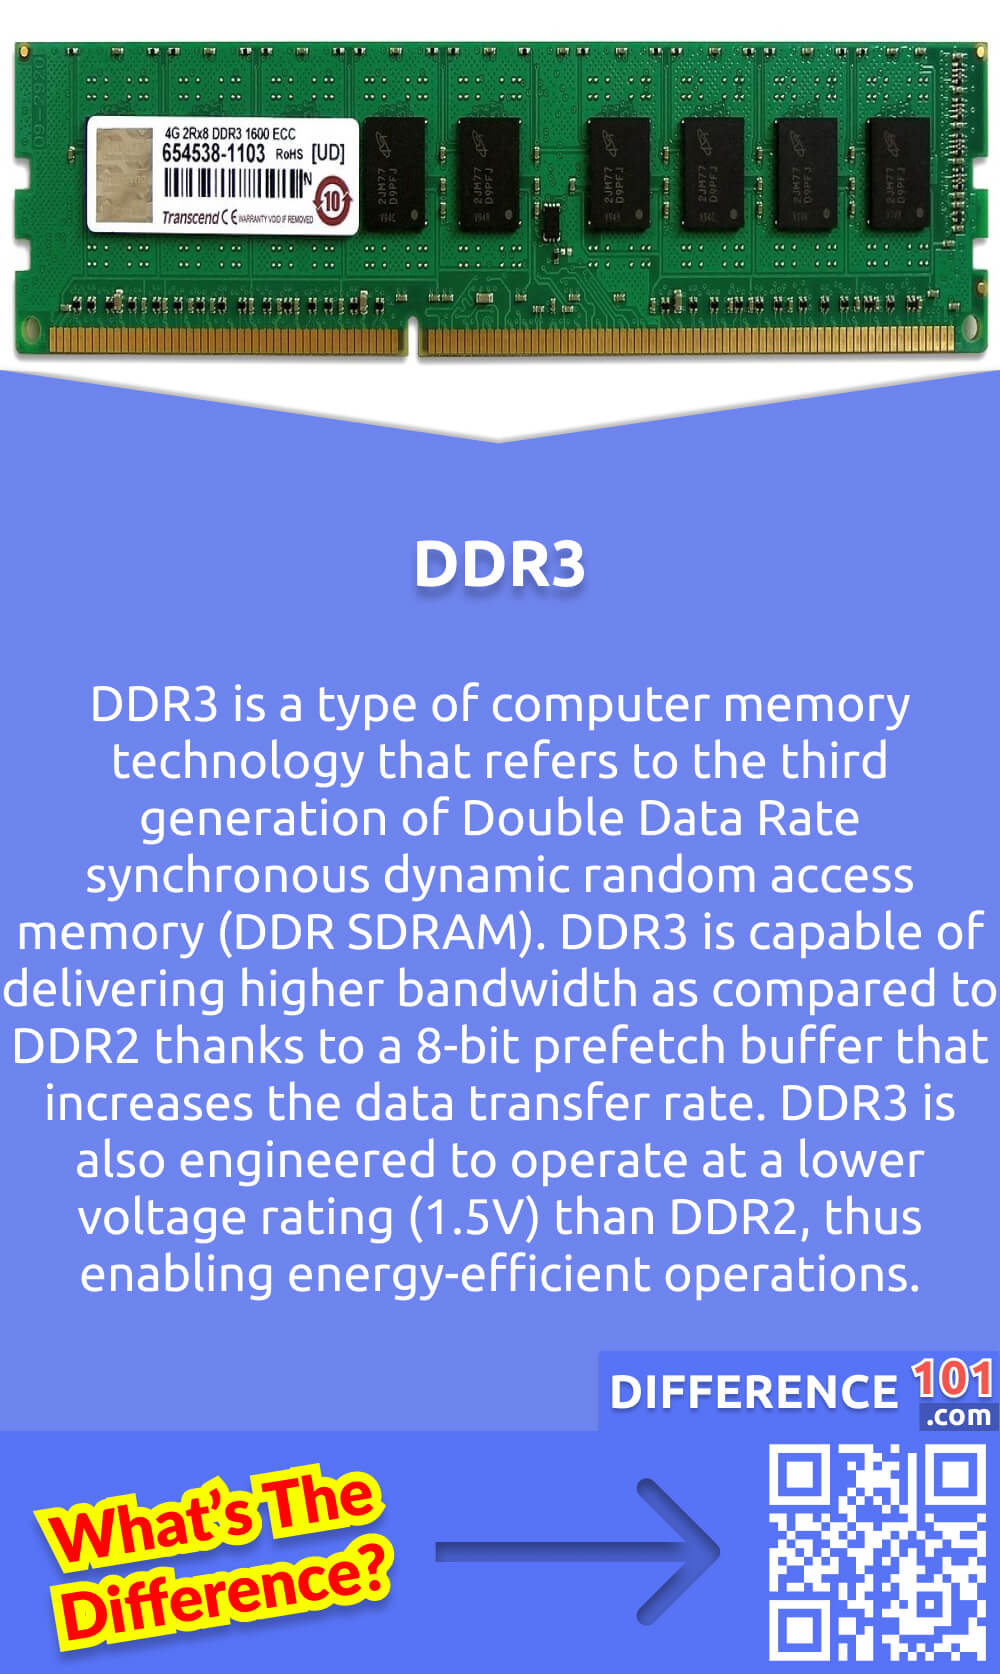 What Is DDR3? DDR3 is a type of computer memory technology that refers to the third generation of Double Data Rate synchronous dynamic random access memory (DDR SDRAM). DDR3 is capable of delivering higher bandwidth as compared to DDR2 thanks to a 8-bit prefetch buffer that increases the data transfer rate. DDR3 is also engineered to operate at a lower voltage rating (1.5V) than DDR2, thus enabling energy-efficient operations. Additionally, DDR3 memory modules have a higher maximum memory capacity and transfer rate compared to DDR2, thereby making them more efficient in memory-intensive tasks. Overall, DDR3 is a high-performance memory technology that’s widely used in modern-day computers for robust operations and faster computational speeds.